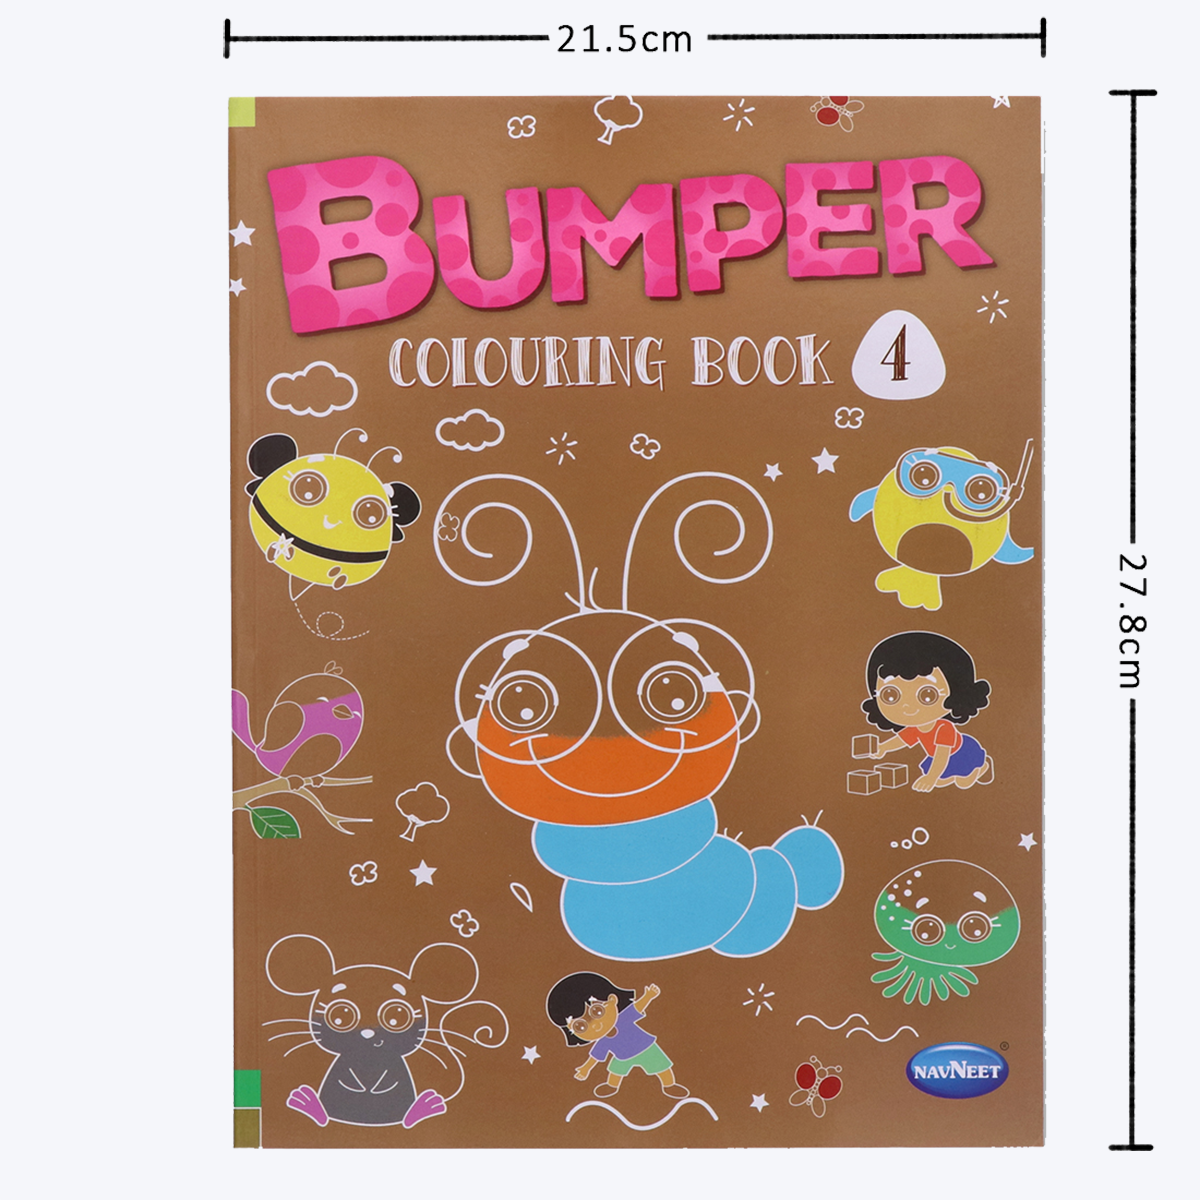 Navneet Bumper Colouring Book - 4 Best for Children Activity Youva Stationery- Crayon Colouring